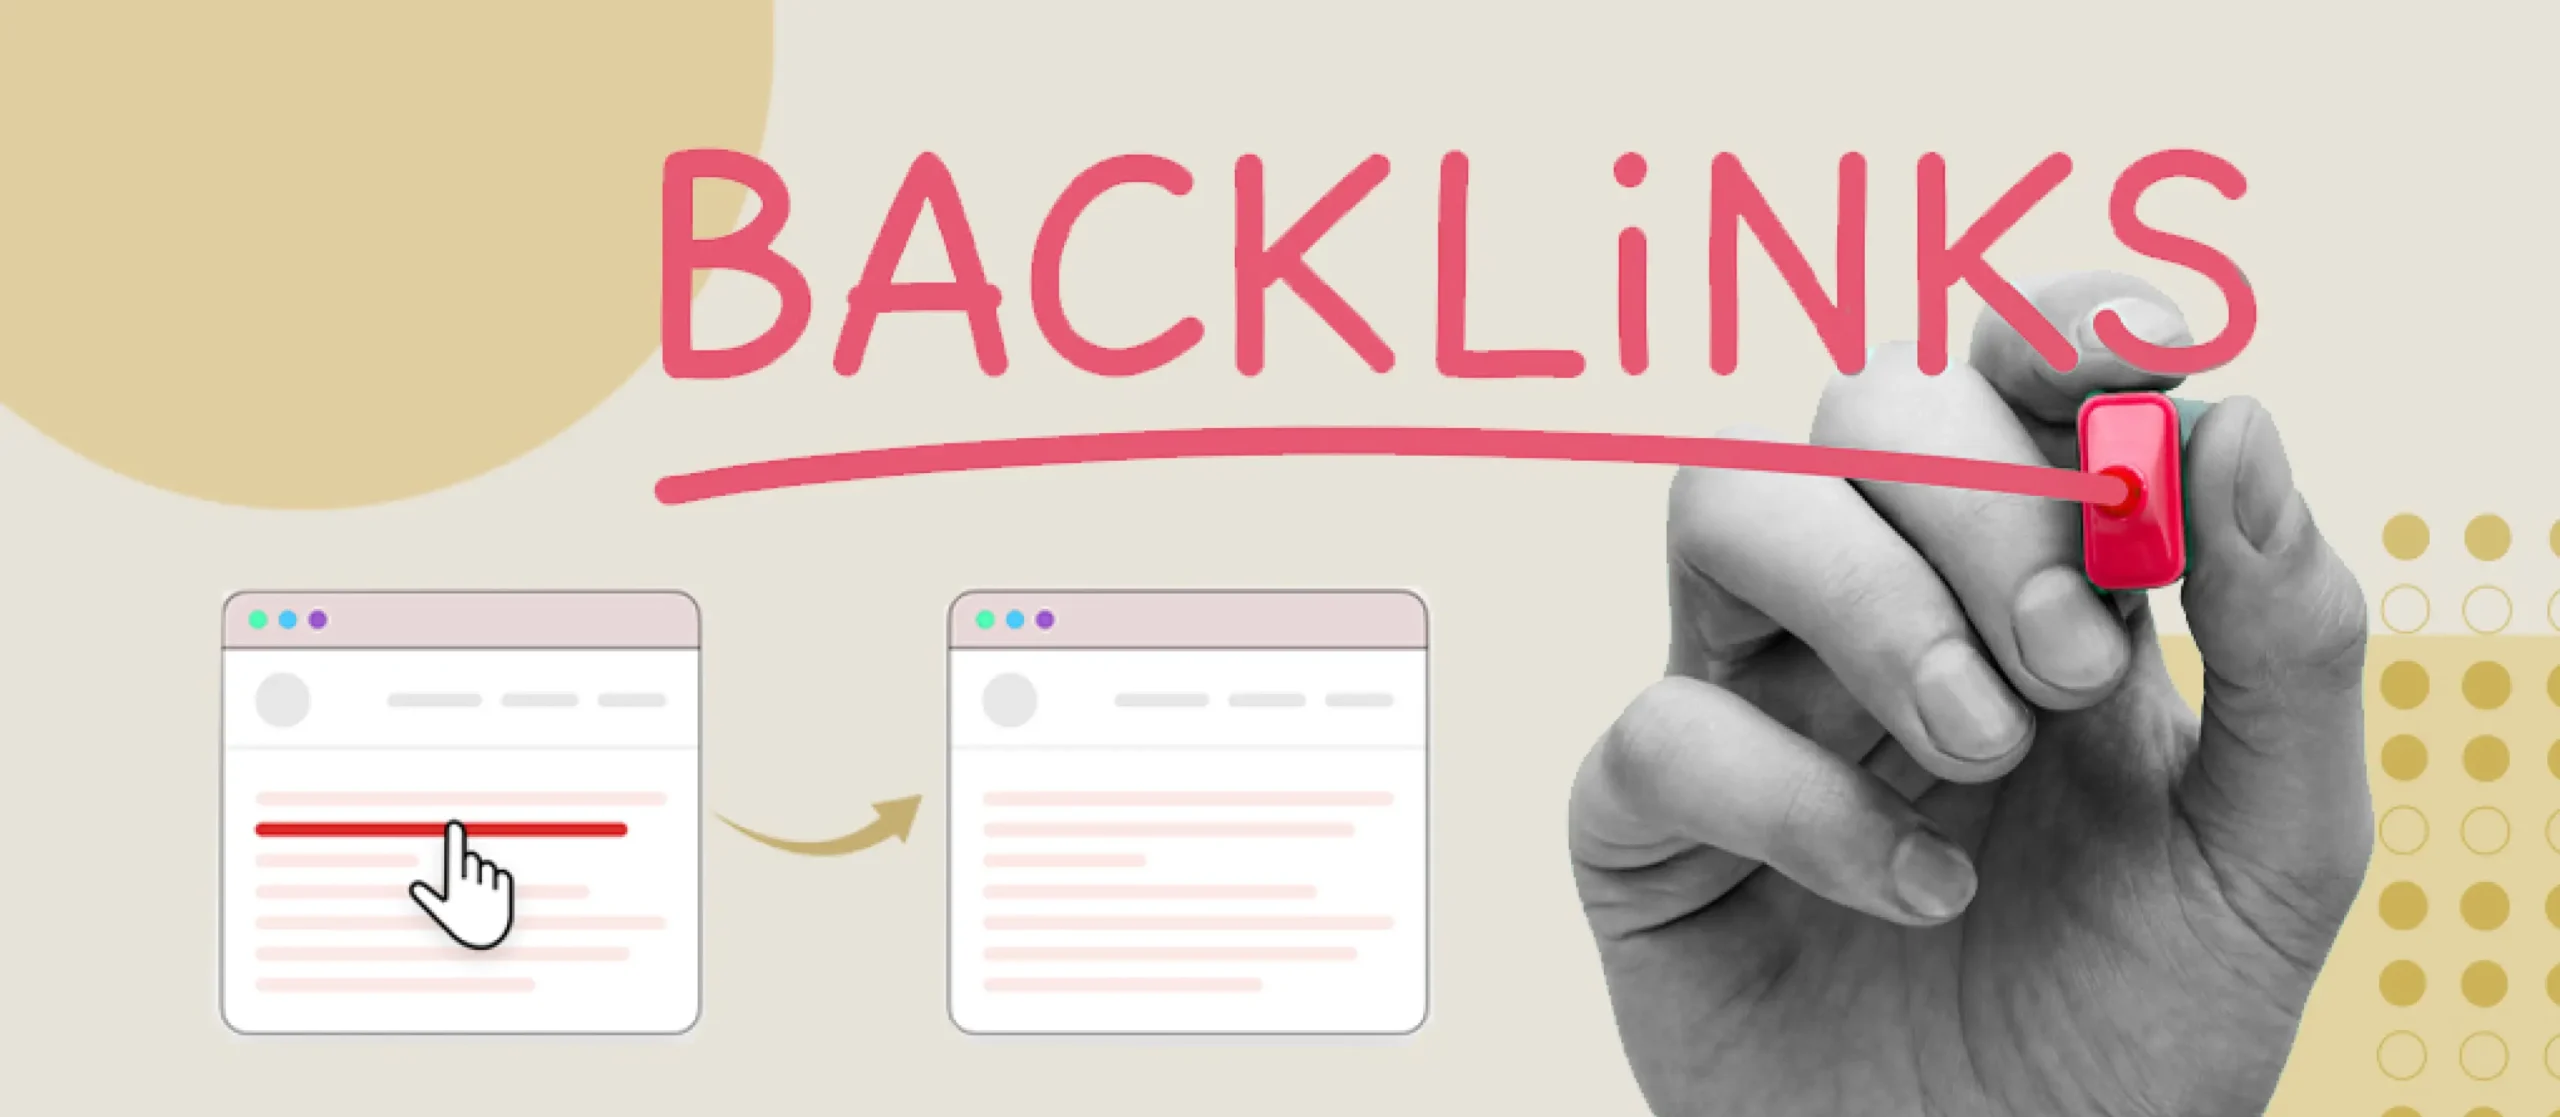 what are Backlinks in SEO